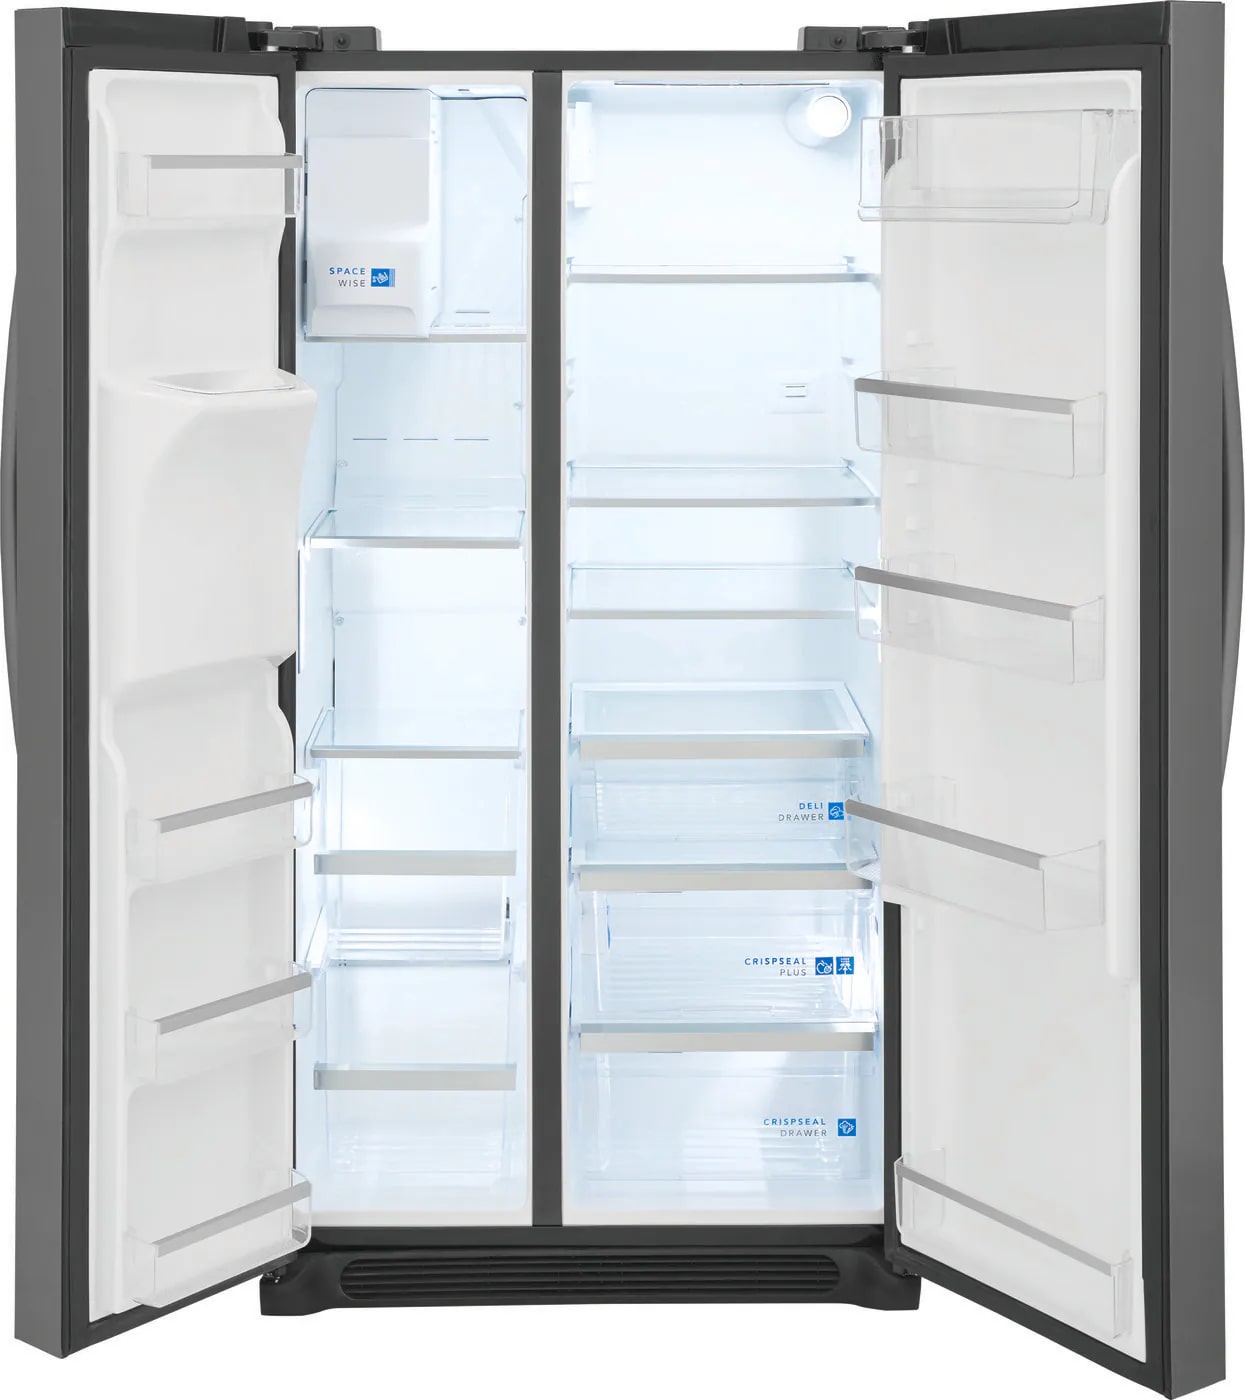 Frigidaire Gallery - 36.2 Inch 22.3 cu. ft Side by Side Refrigerator in Black Stainless - GRSC2352AD